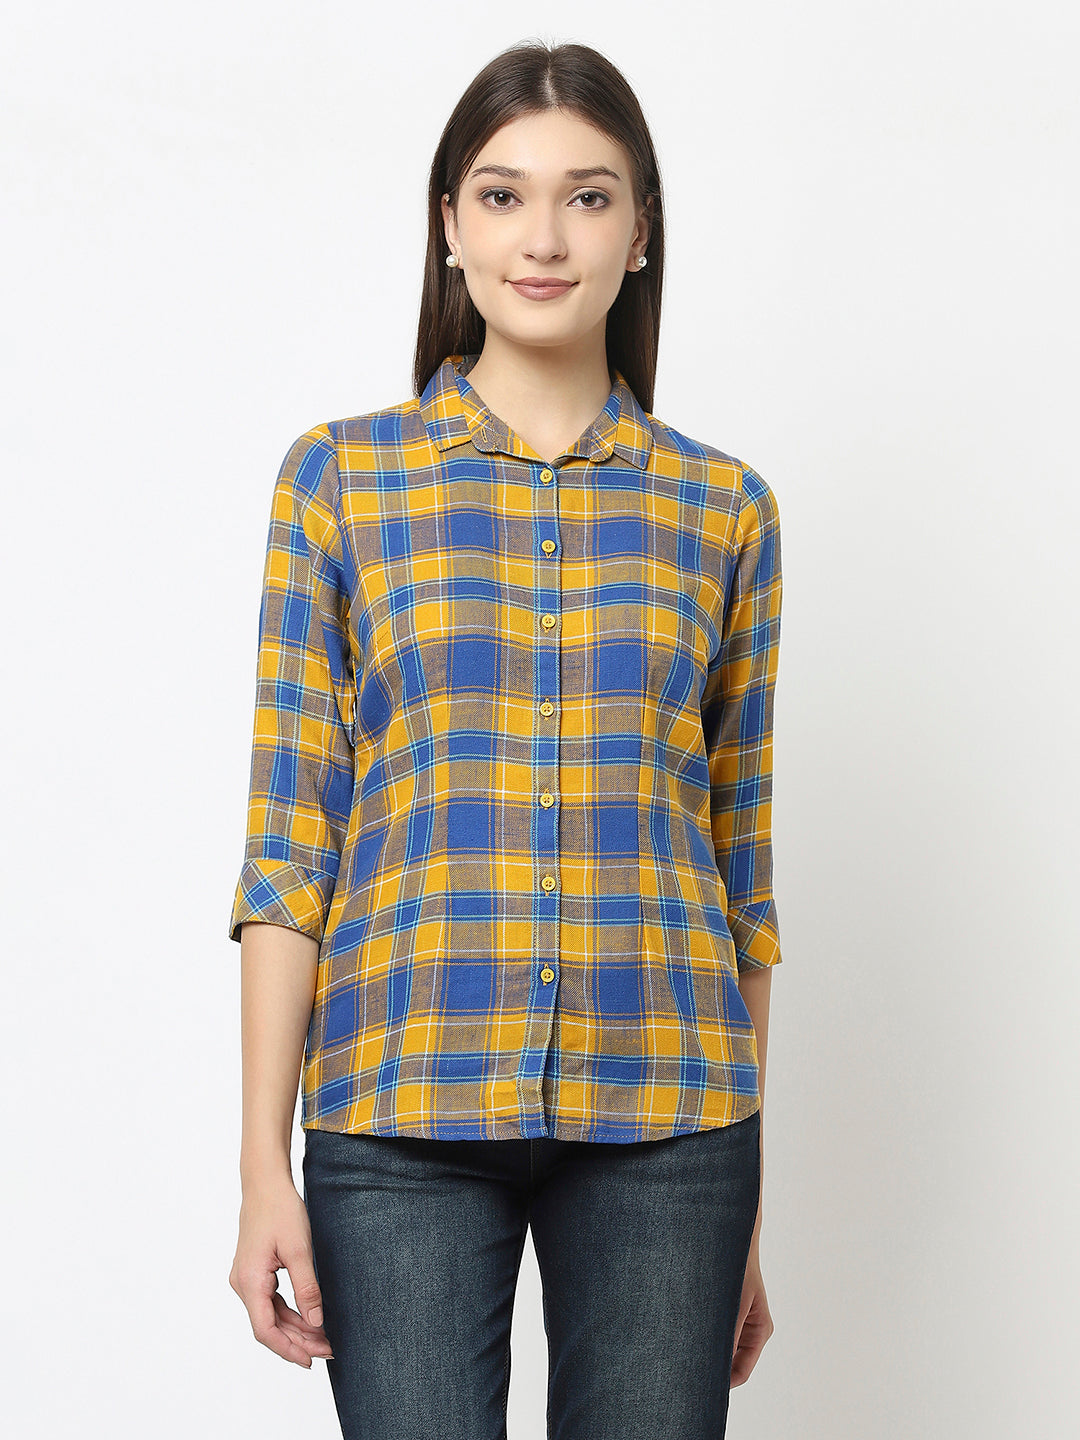 Mustard Checked Shirt in Cotton Blend